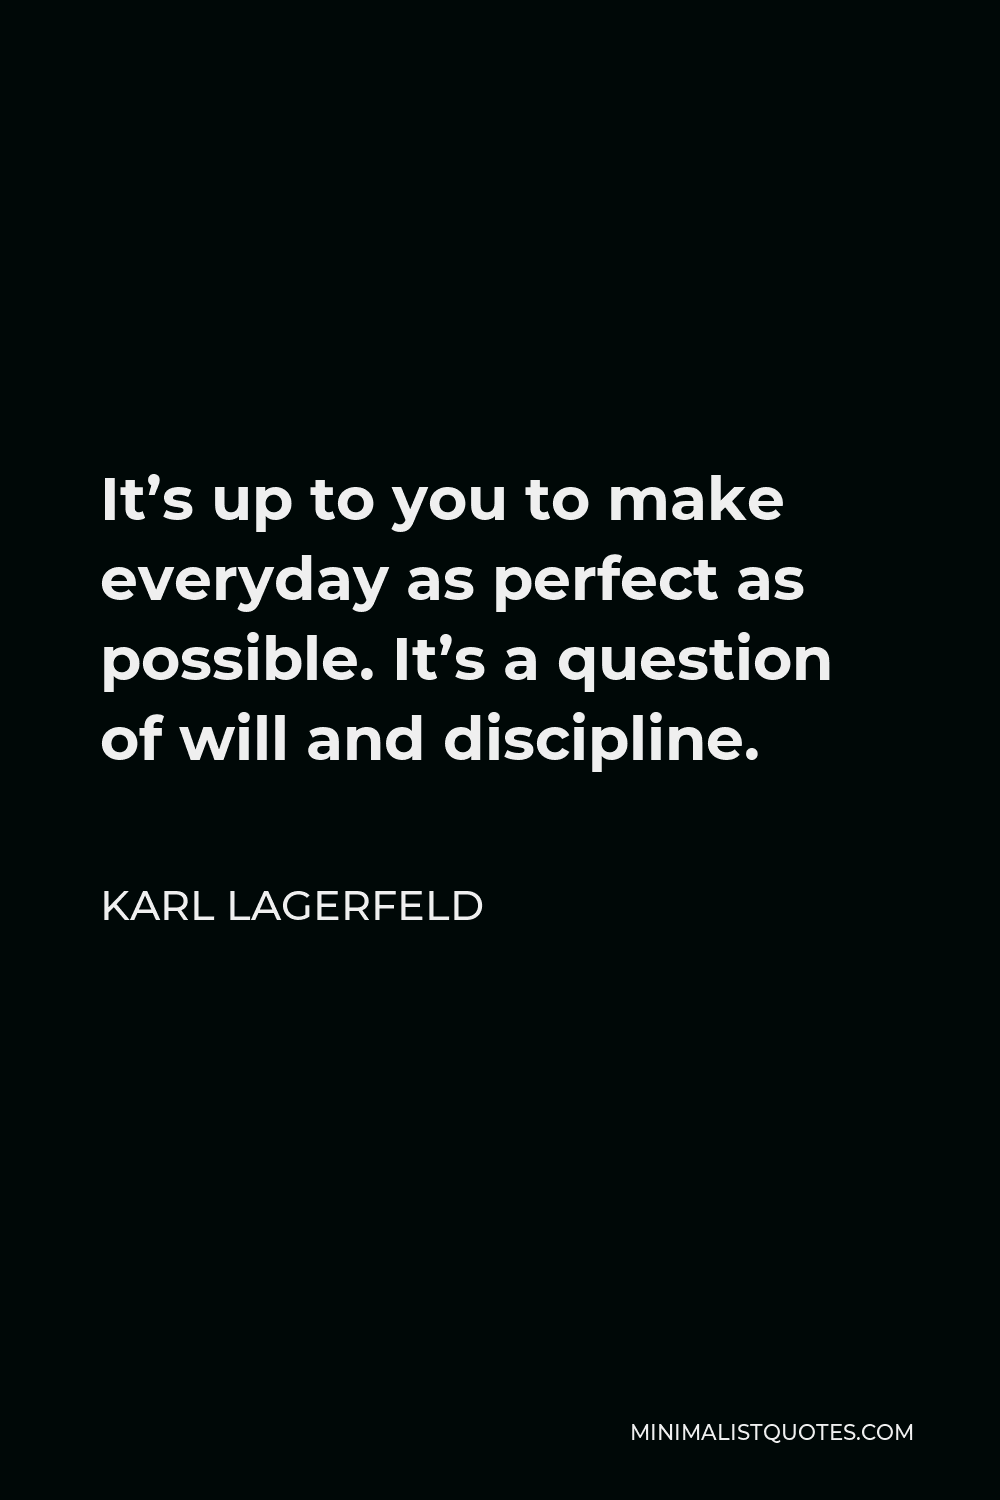 Karl Lagerfeld Quote - It’s up to you to make everyday as perfect as possible. It’s a question of will and discipline.